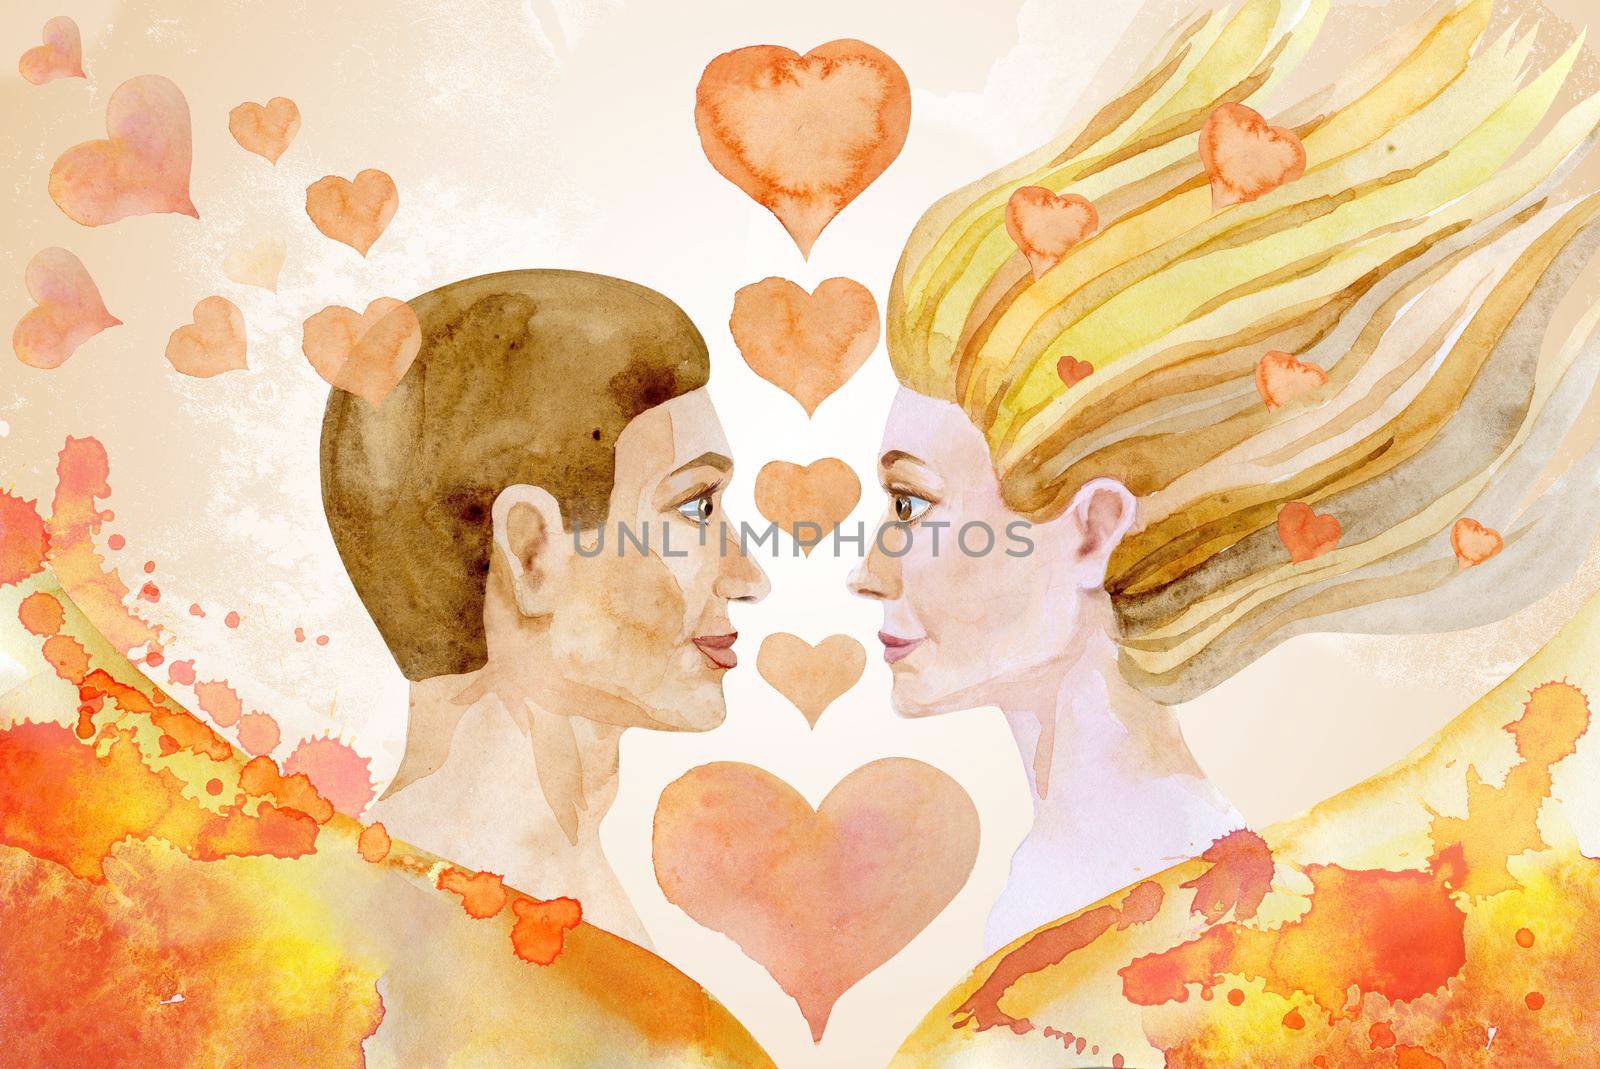 watercolor painting of man and woman with hearts by NataOmsk